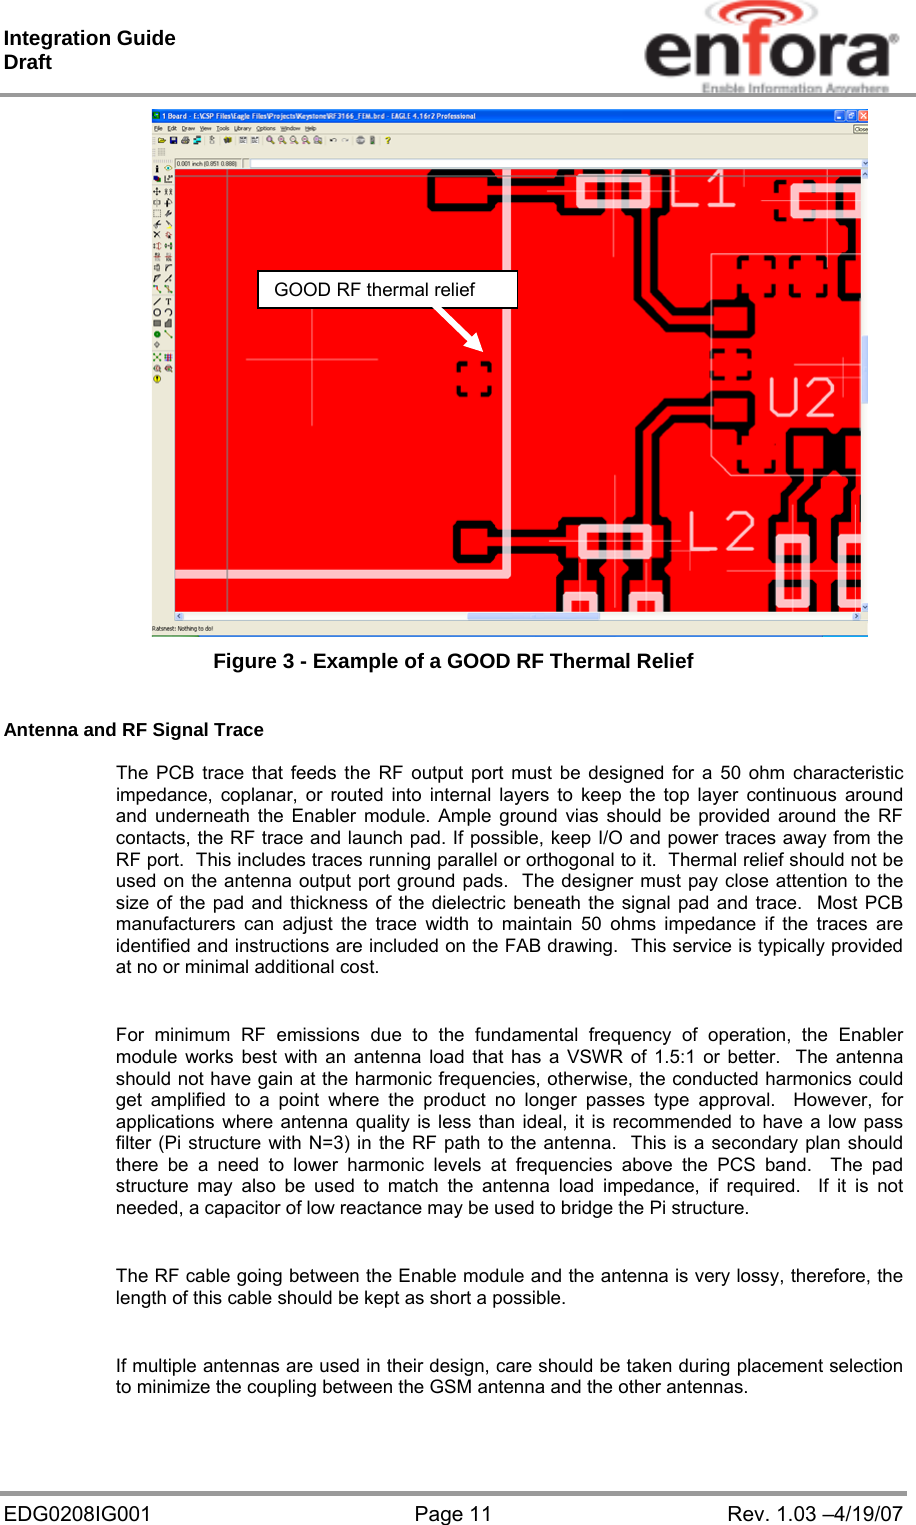 Integration Guide  Draft EDG0208IG001  Page 11  Rev. 1.03 –4/19/07  Figure 3 - Example of a GOOD RF Thermal Relief  Antenna and RF Signal Trace  The PCB trace that feeds the RF output port must be designed for a 50 ohm characteristic impedance, coplanar, or routed into internal layers to keep the top layer continuous around and underneath the Enabler module. Ample ground vias should be provided around the RF contacts, the RF trace and launch pad. If possible, keep I/O and power traces away from the RF port.  This includes traces running parallel or orthogonal to it.  Thermal relief should not be used on the antenna output port ground pads.  The designer must pay close attention to the size of the pad and thickness of the dielectric beneath the signal pad and trace.  Most PCB manufacturers can adjust the trace width to maintain 50 ohms impedance if the traces are identified and instructions are included on the FAB drawing.  This service is typically provided at no or minimal additional cost.  For minimum RF emissions due to the fundamental frequency of operation, the Enabler module works best with an antenna load that has a VSWR of 1.5:1 or better.  The antenna should not have gain at the harmonic frequencies, otherwise, the conducted harmonics could get amplified to a point where the product no longer passes type approval.  However, for applications where antenna quality is less than ideal, it is recommended to have a low pass filter (Pi structure with N=3) in the RF path to the antenna.  This is a secondary plan should there be a need to lower harmonic levels at frequencies above the PCS band.  The pad structure may also be used to match the antenna load impedance, if required.  If it is not needed, a capacitor of low reactance may be used to bridge the Pi structure.  The RF cable going between the Enable module and the antenna is very lossy, therefore, the length of this cable should be kept as short a possible.  If multiple antennas are used in their design, care should be taken during placement selection to minimize the coupling between the GSM antenna and the other antennas.  GOOD RF thermal relief